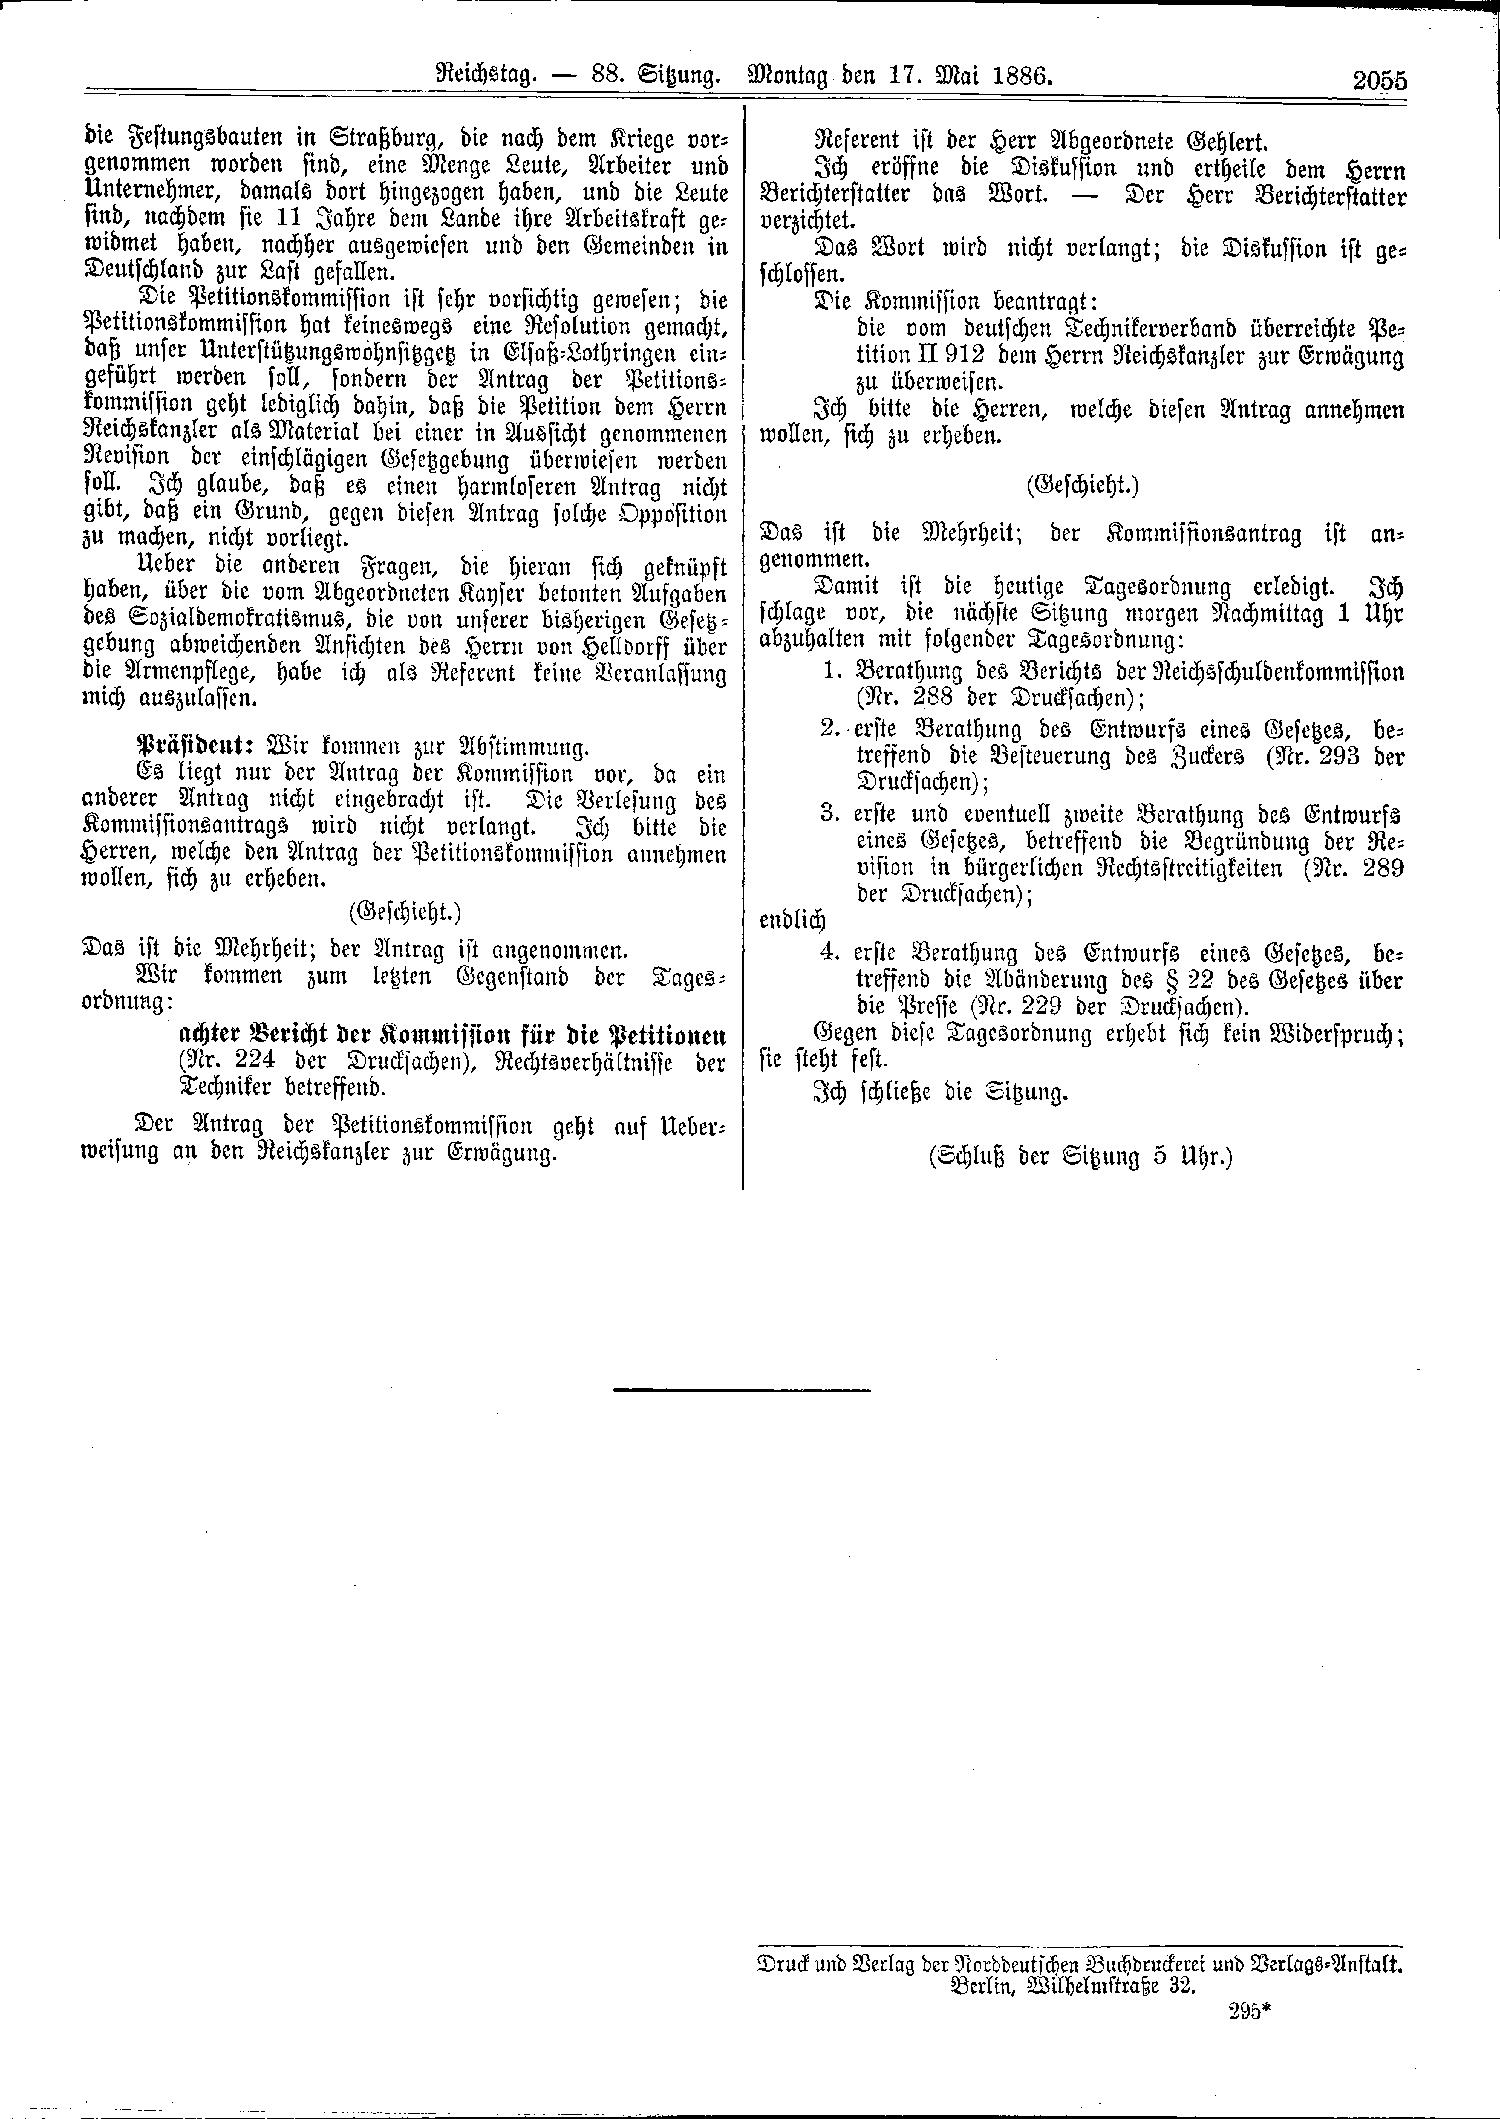 Scan of page 2055